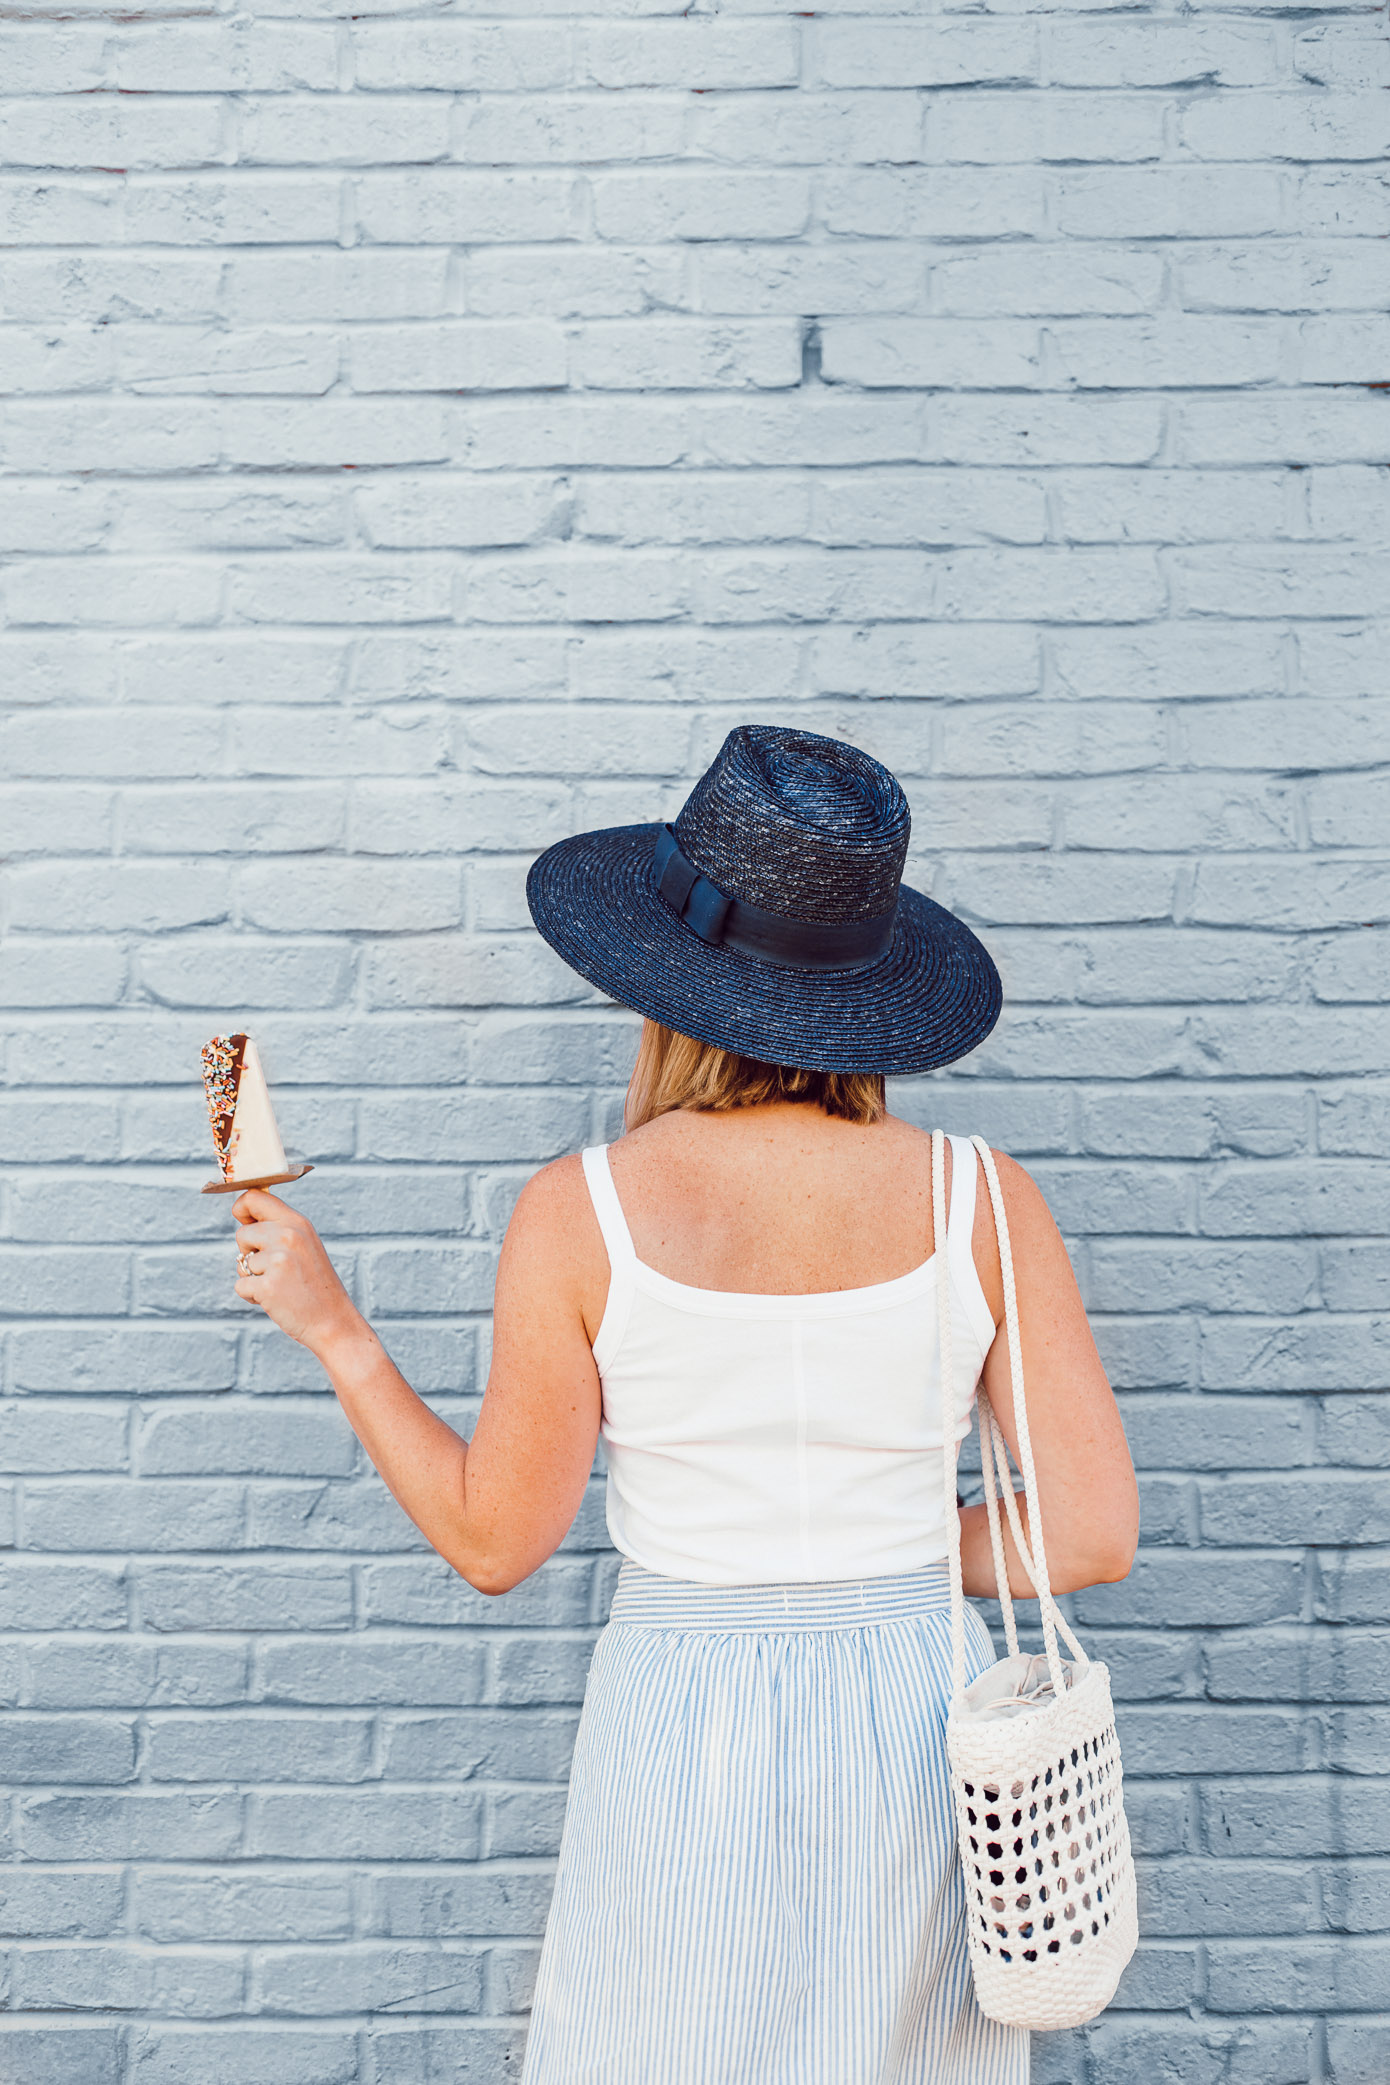 The BEST Straw Hats for Summer 2019 | Affordable Straw Hats | Louella Reese